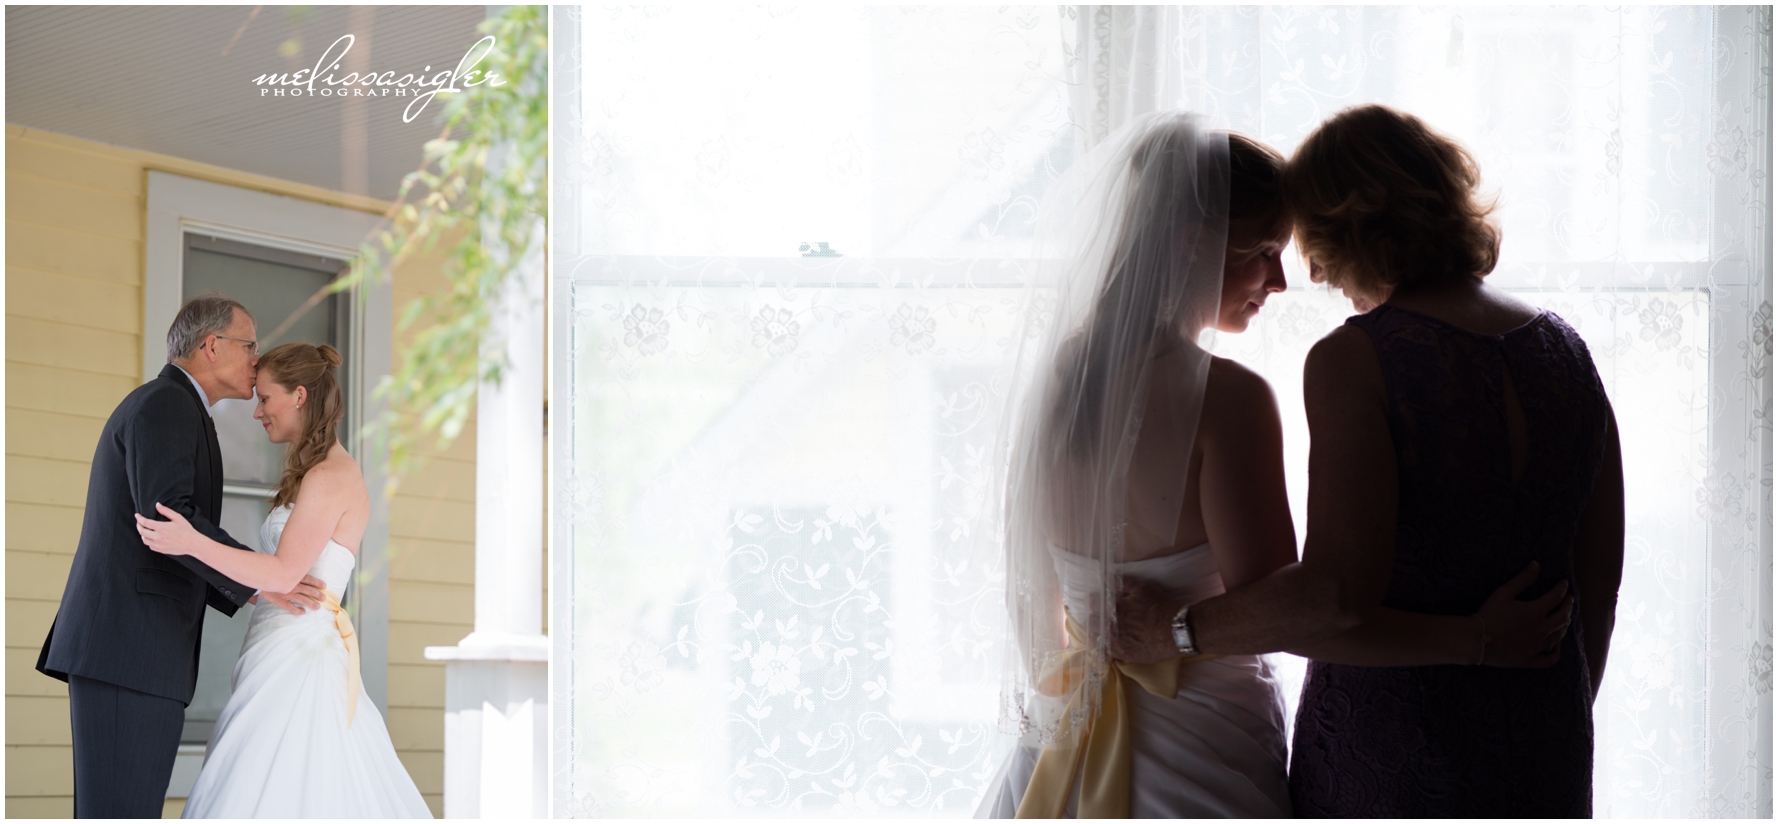 Portrait of bride and her mother at Victorian Veranda by Lawrence wedding photographer Melissa Sigler